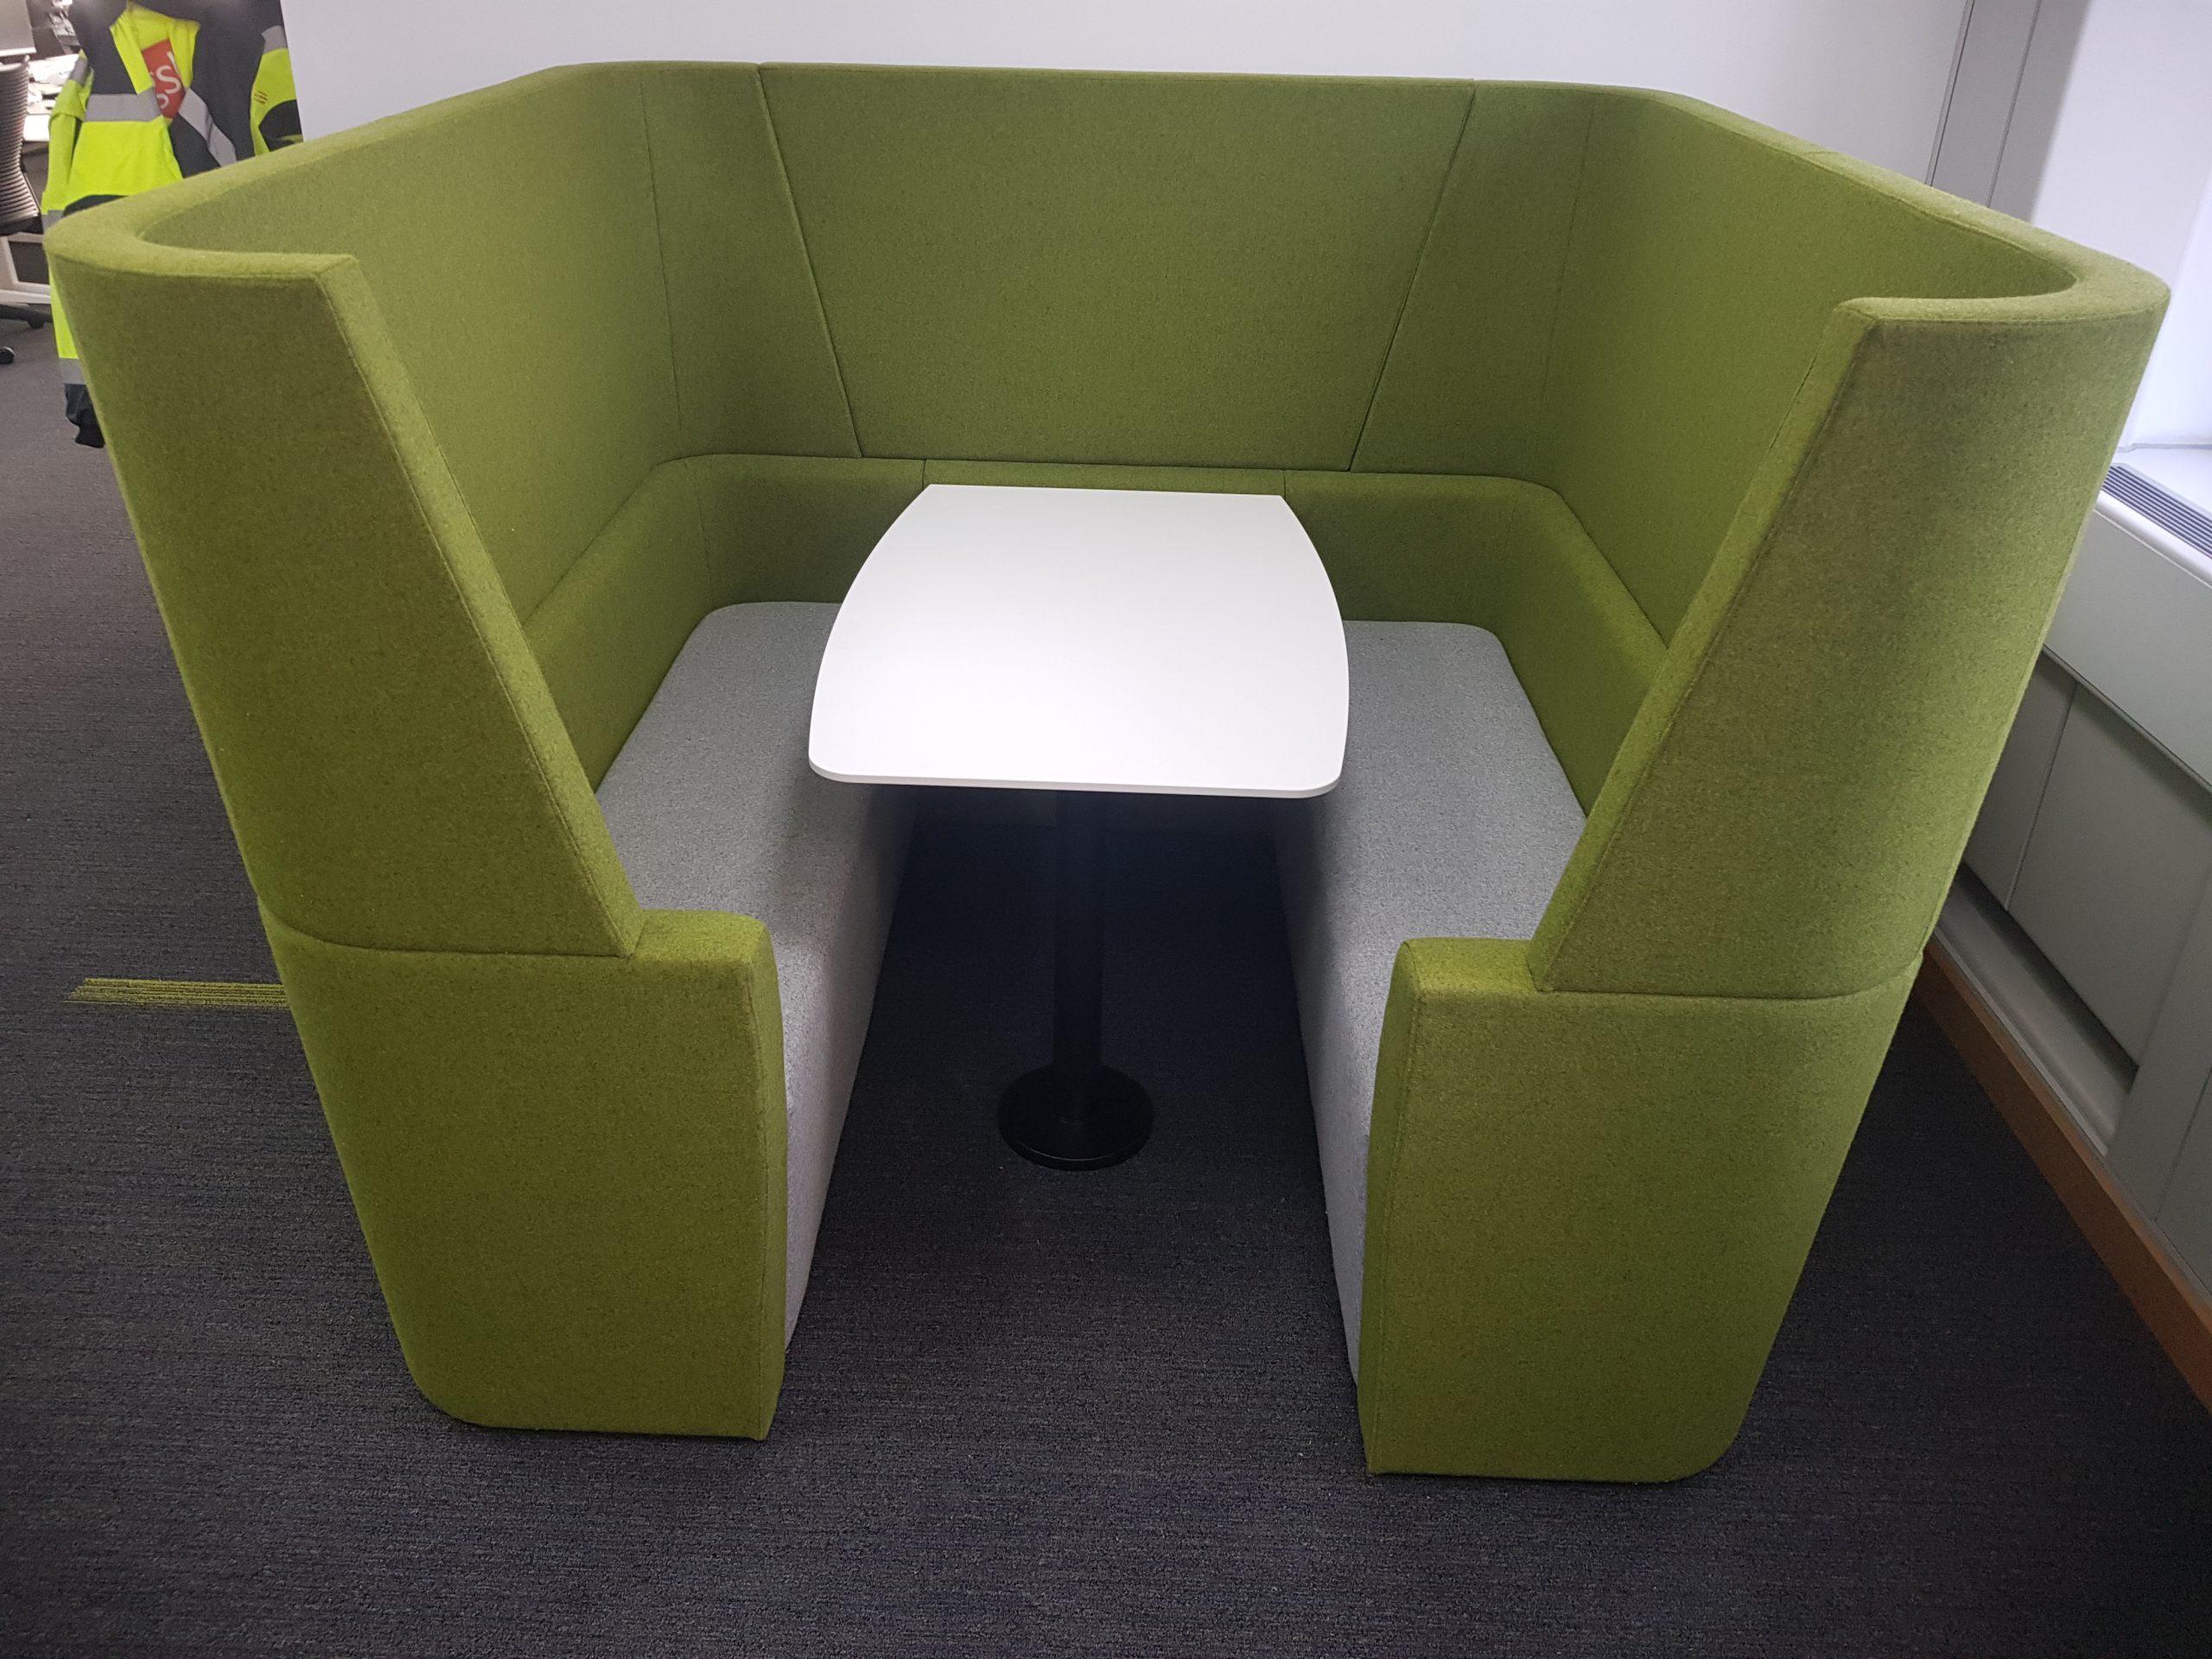 Commercial Project – Upholstered Seating Pod